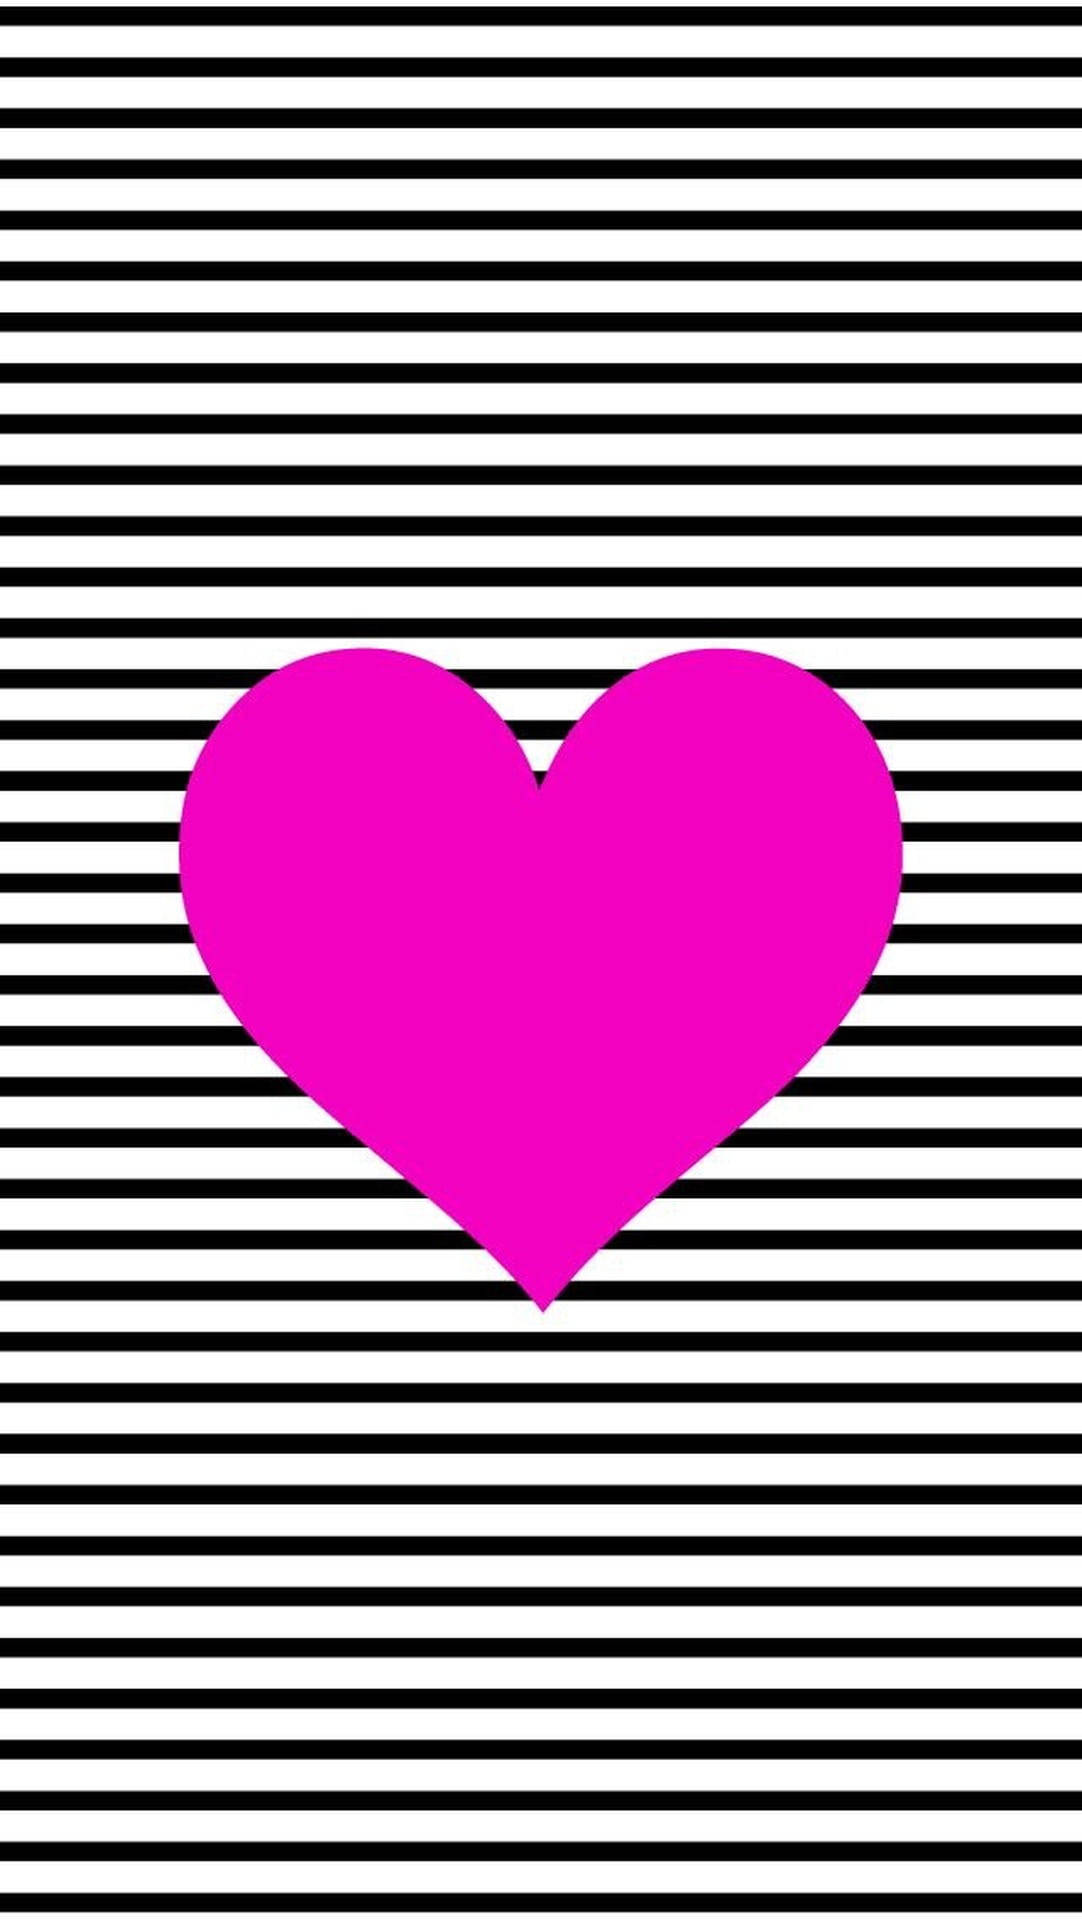 Black And White Stripe Pink Heart Background